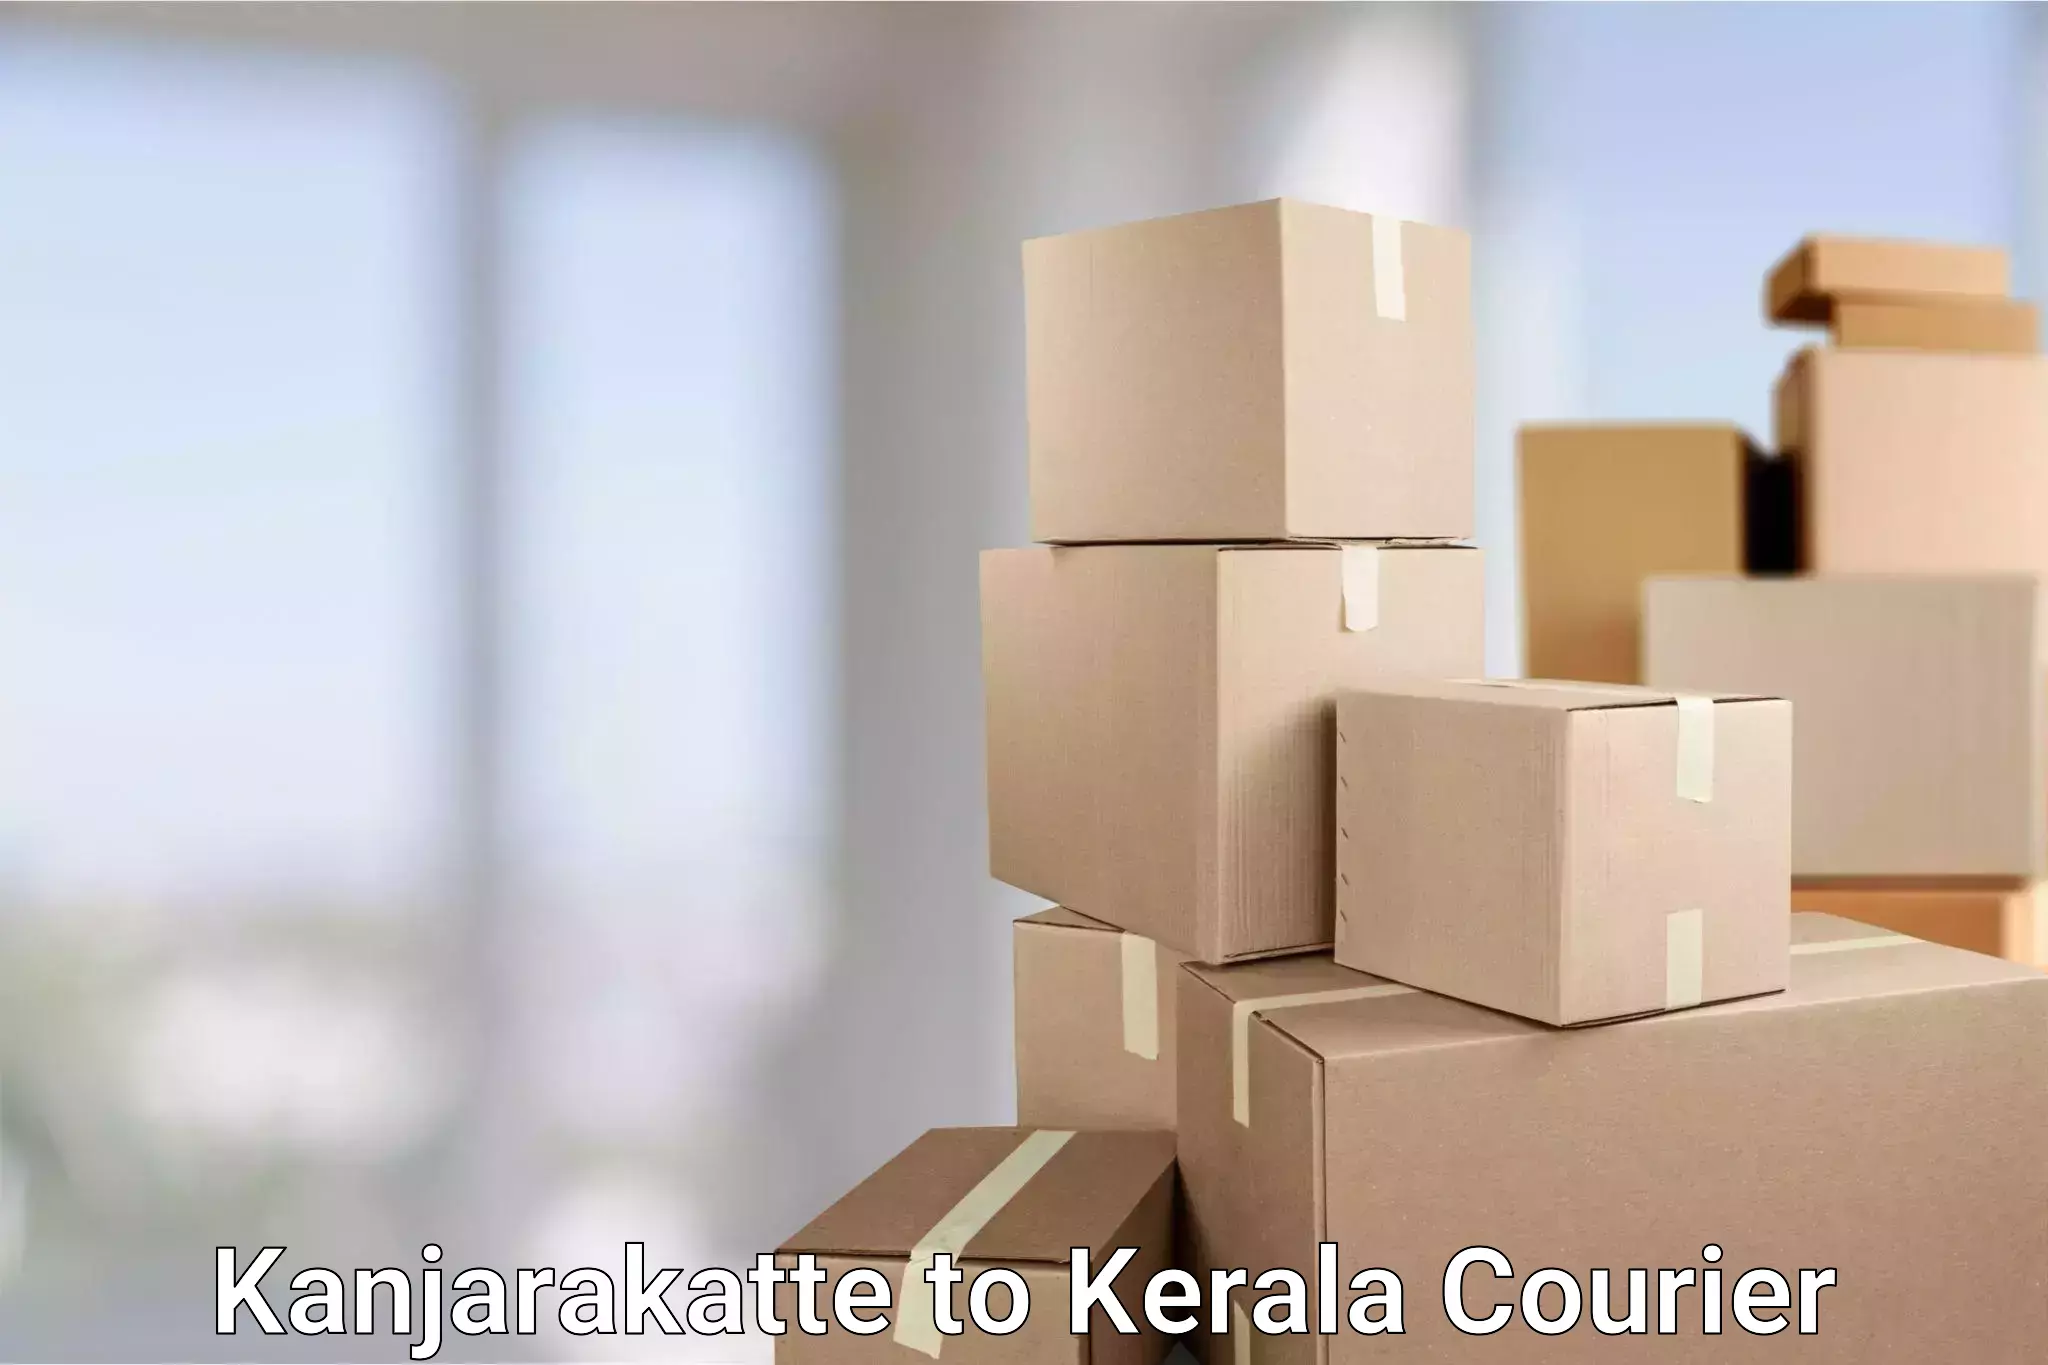 Round-the-clock parcel delivery Kanjarakatte to Kollam